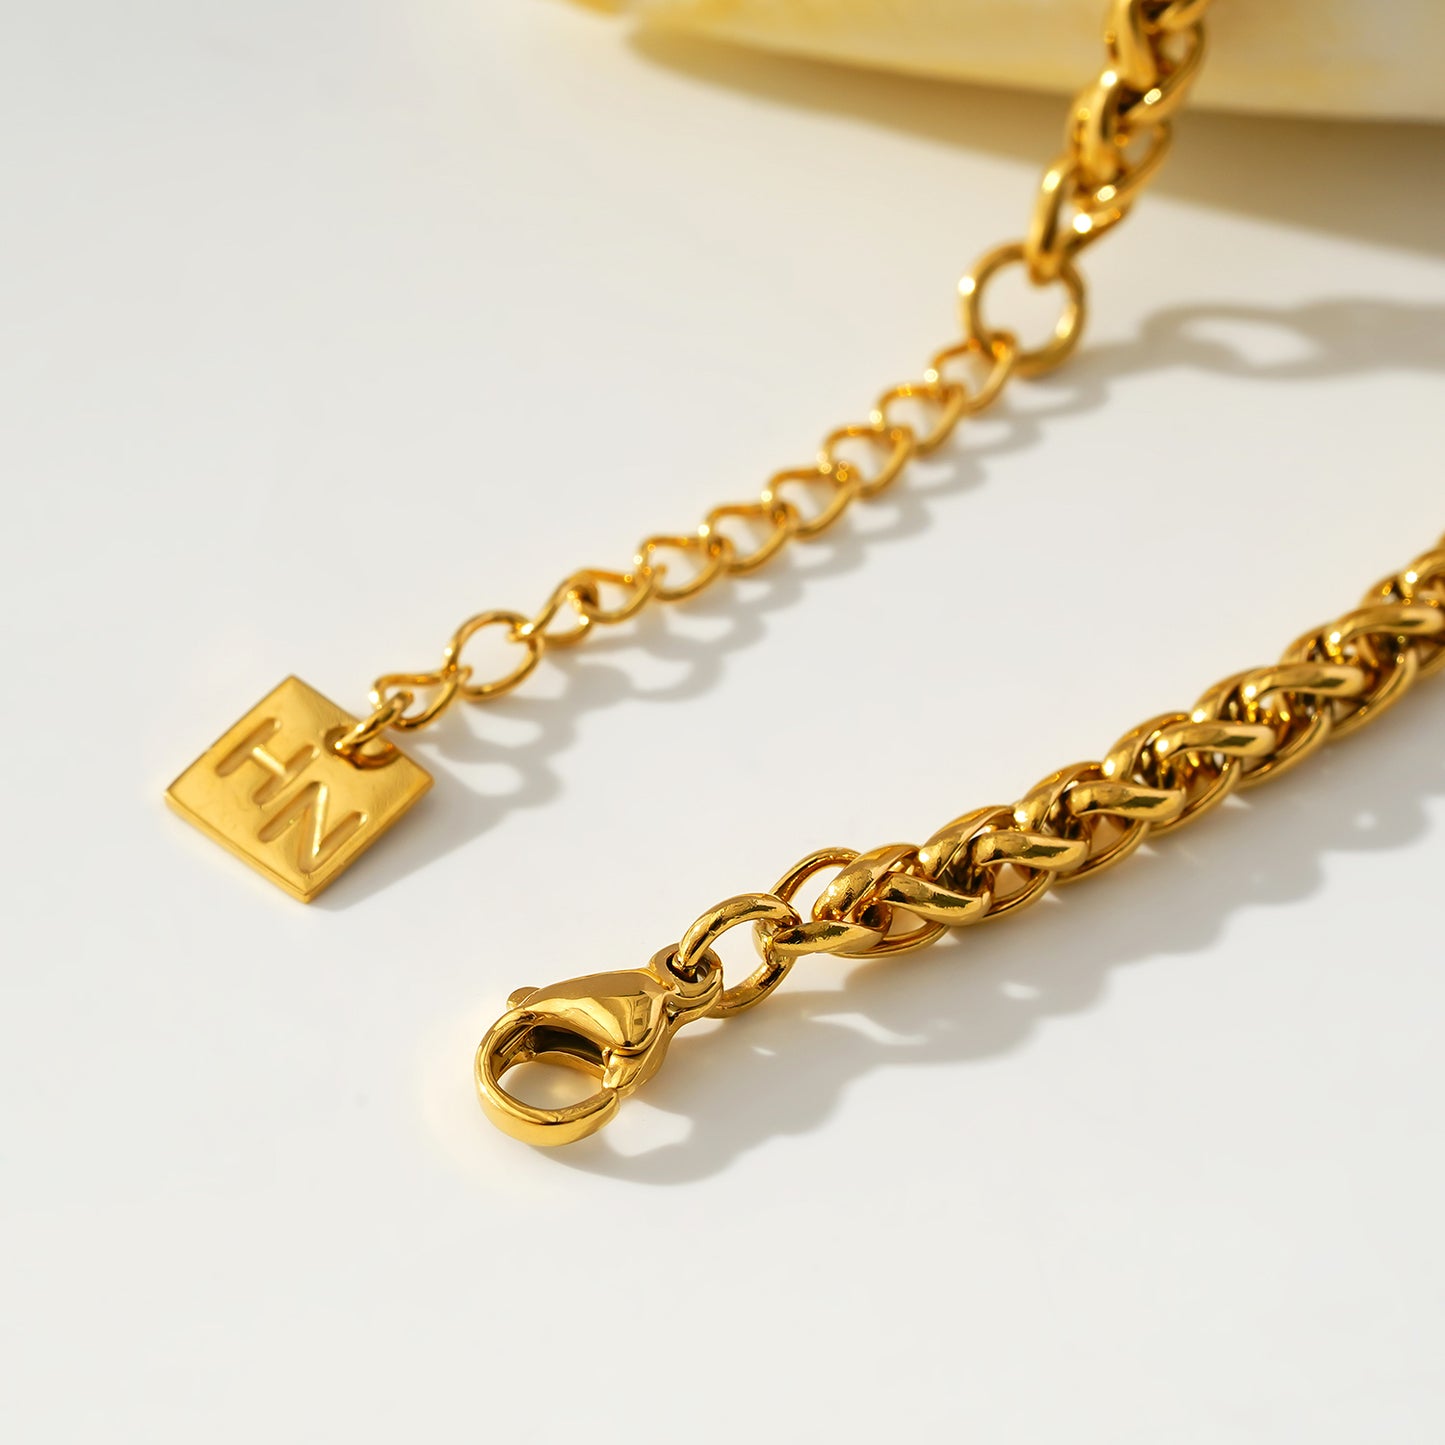 Style ALBANY: Chunky Gold Chain Necklace